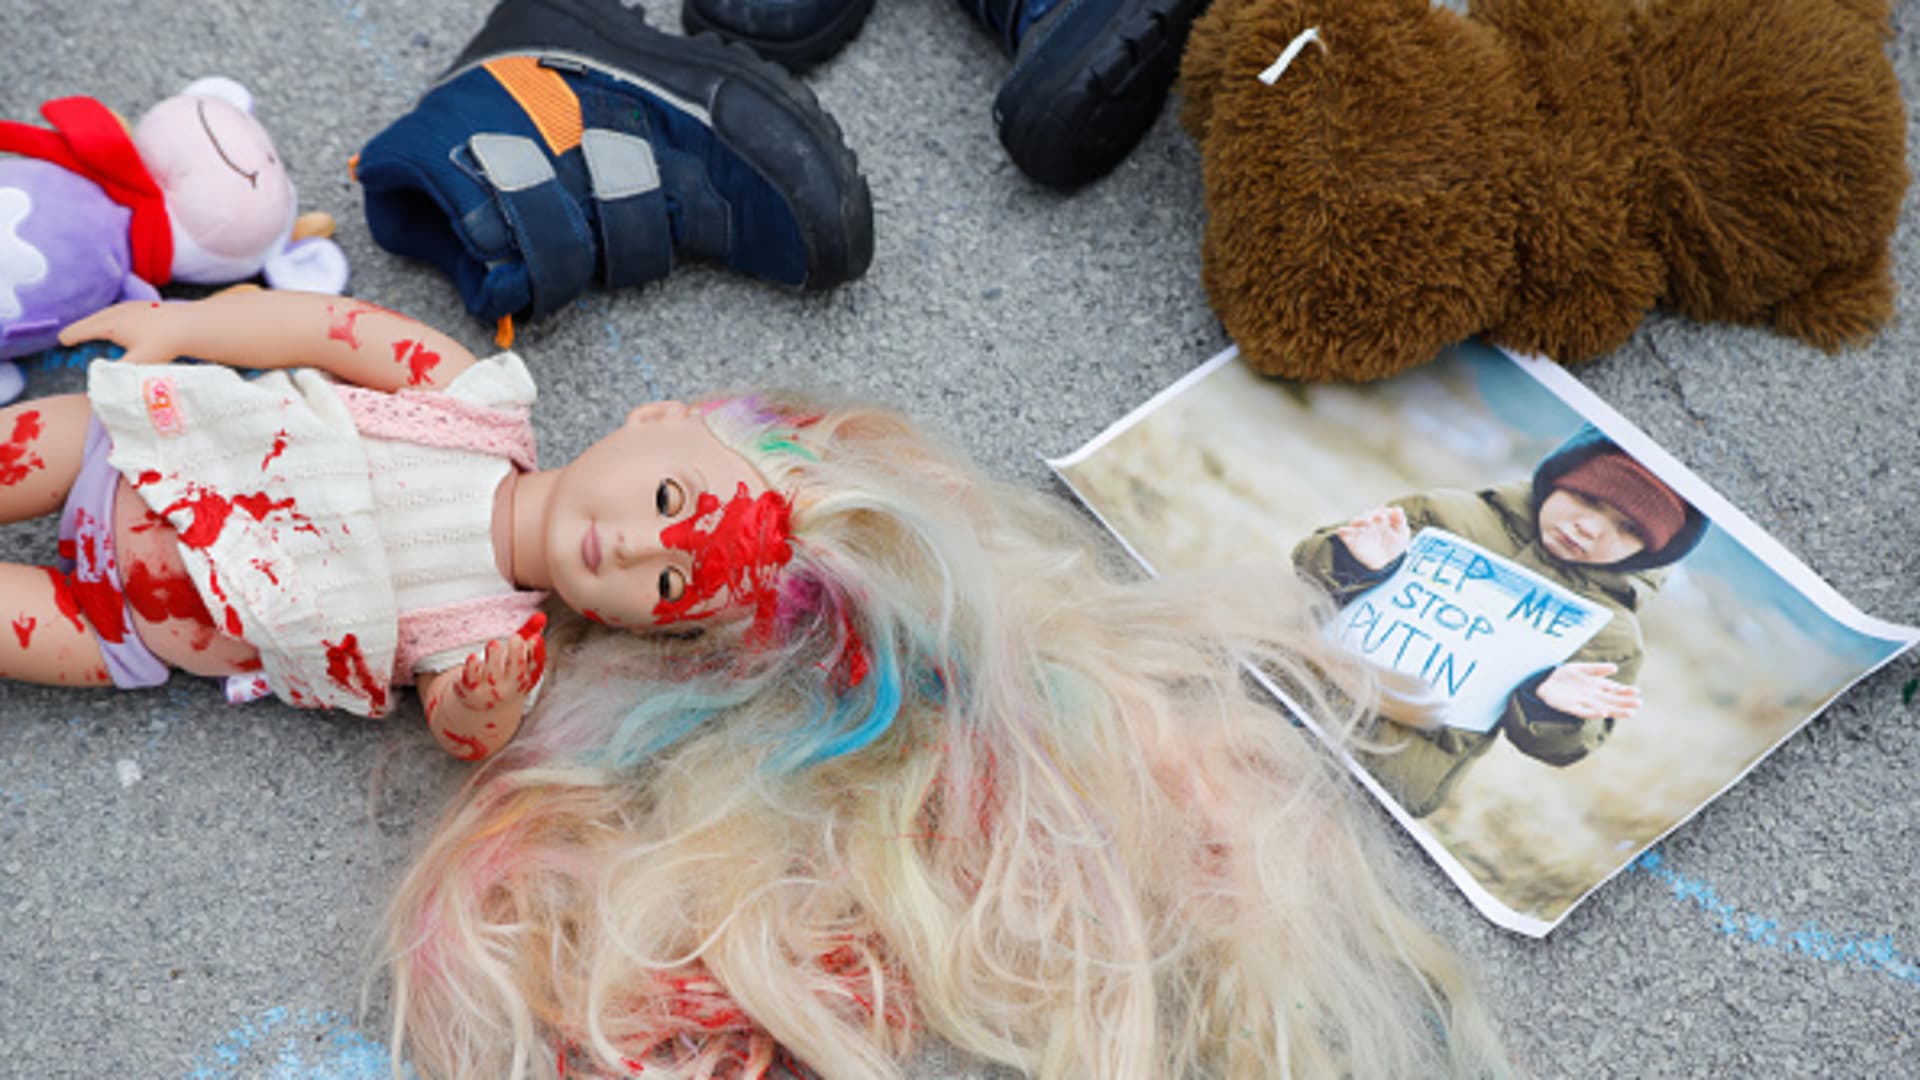 A child's doll stained with red paint lays on the ground during a Europe-wide rally for protection of Ukrainian children affected by the war in Ukraine. Over 240 children have been reported killed in the war so far.